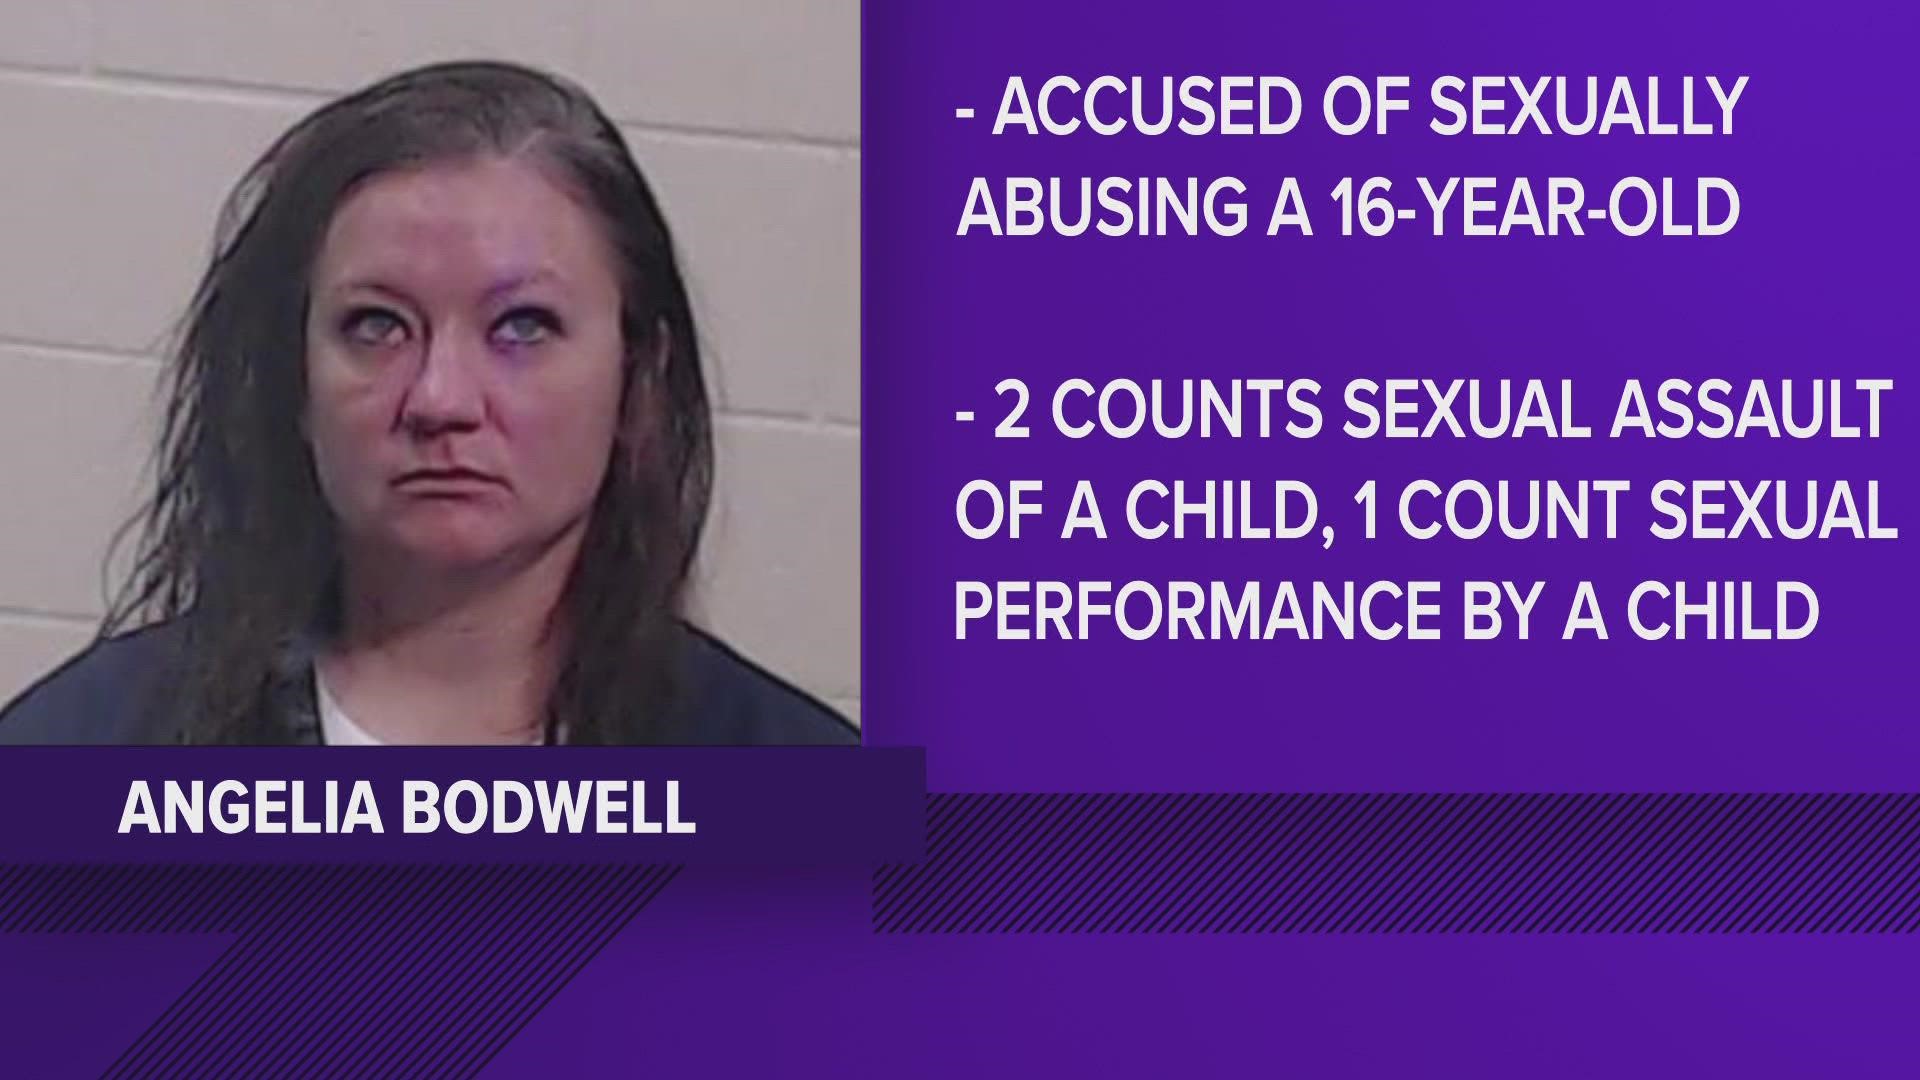 Bodwell is accused of two counts of sexual assault of a child and one count of sexual performance with a child after she admitted to having oral sex with the boy.